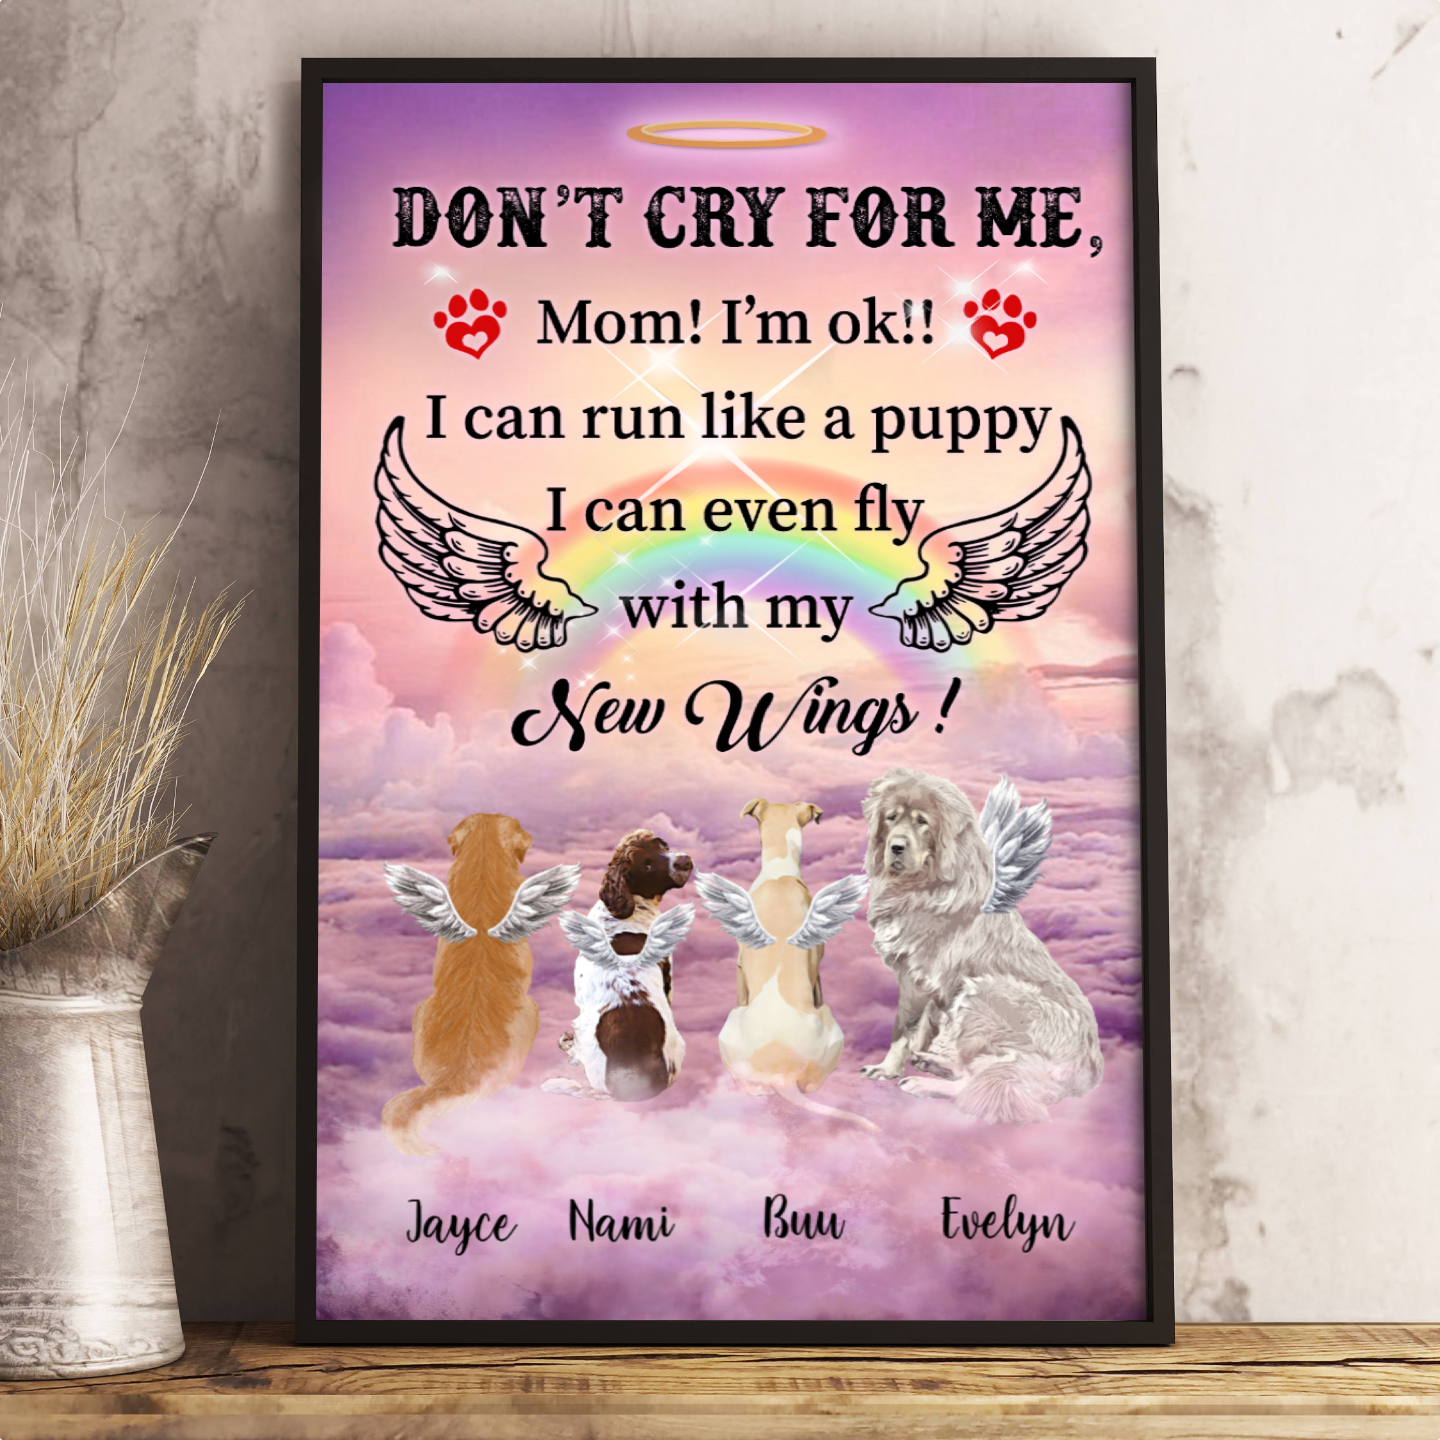 Ciaocustom Poster/Framed Canvas/Unframed Canvas, Custom Dog Breeds/Name/Background/Text, Don't cry for me, Mom! I'm ok! Dogs with Rainbow Bridge